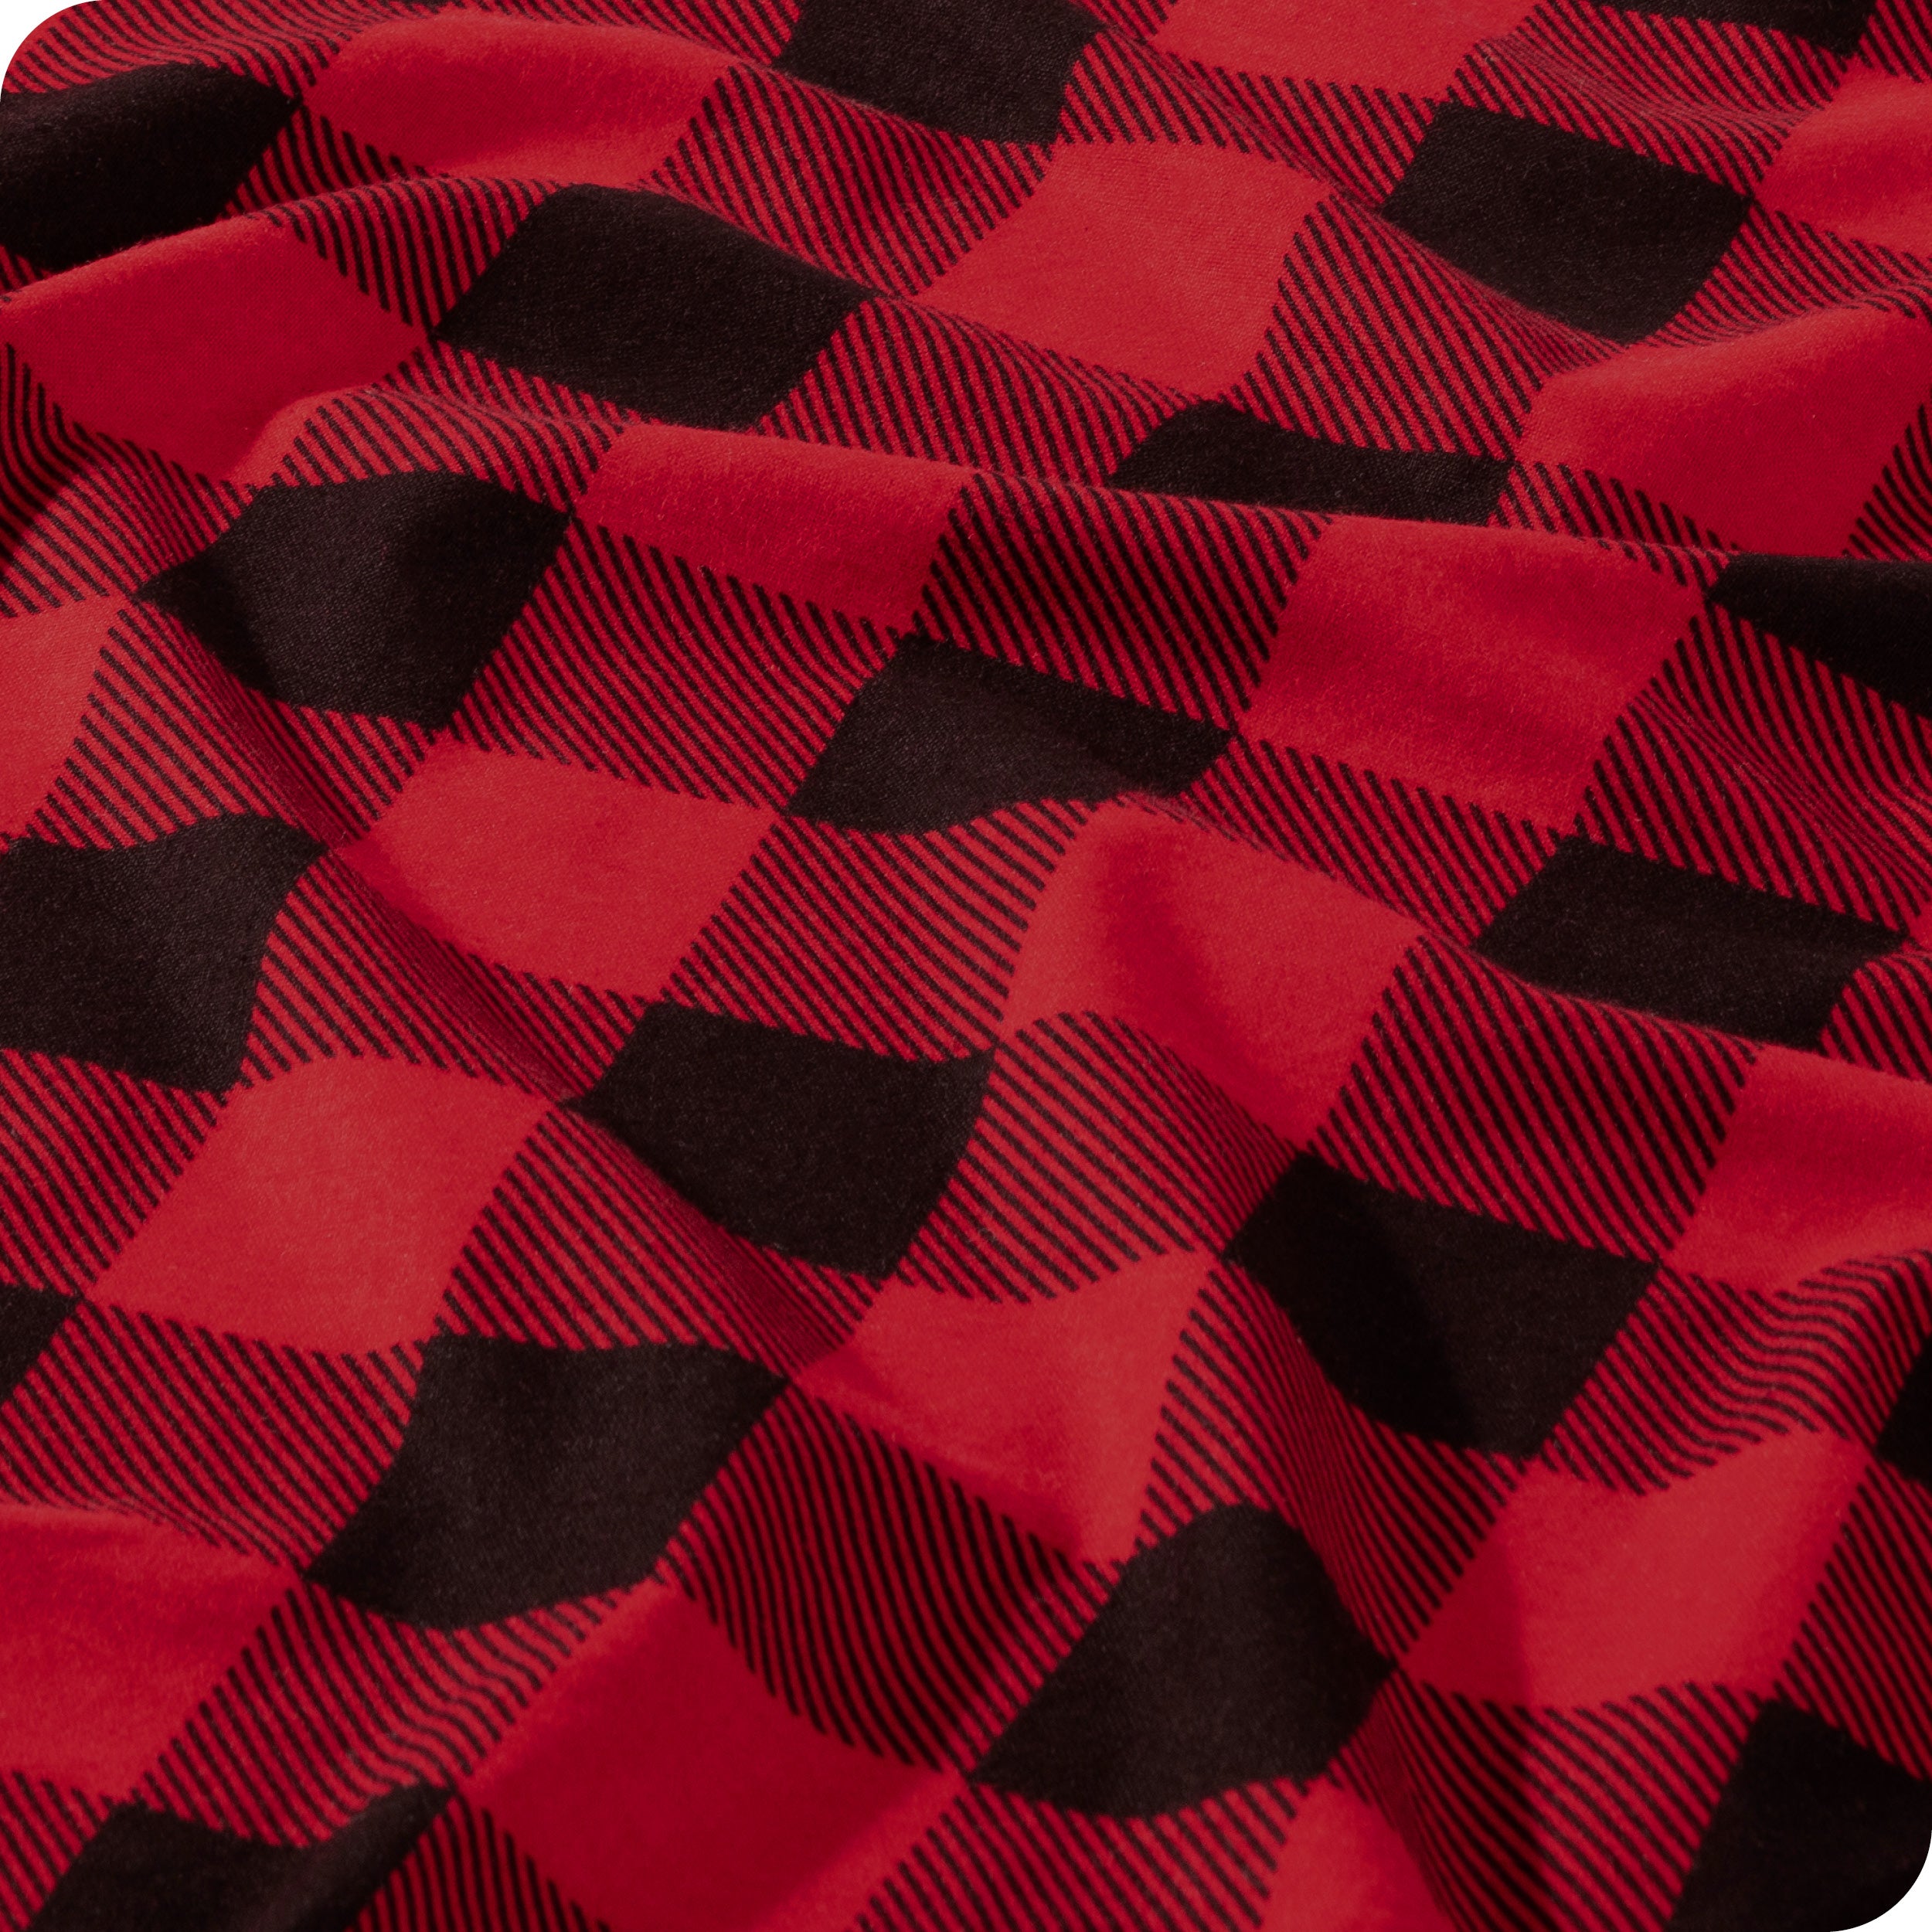 A close up view of a flannel sheet showing the texture.